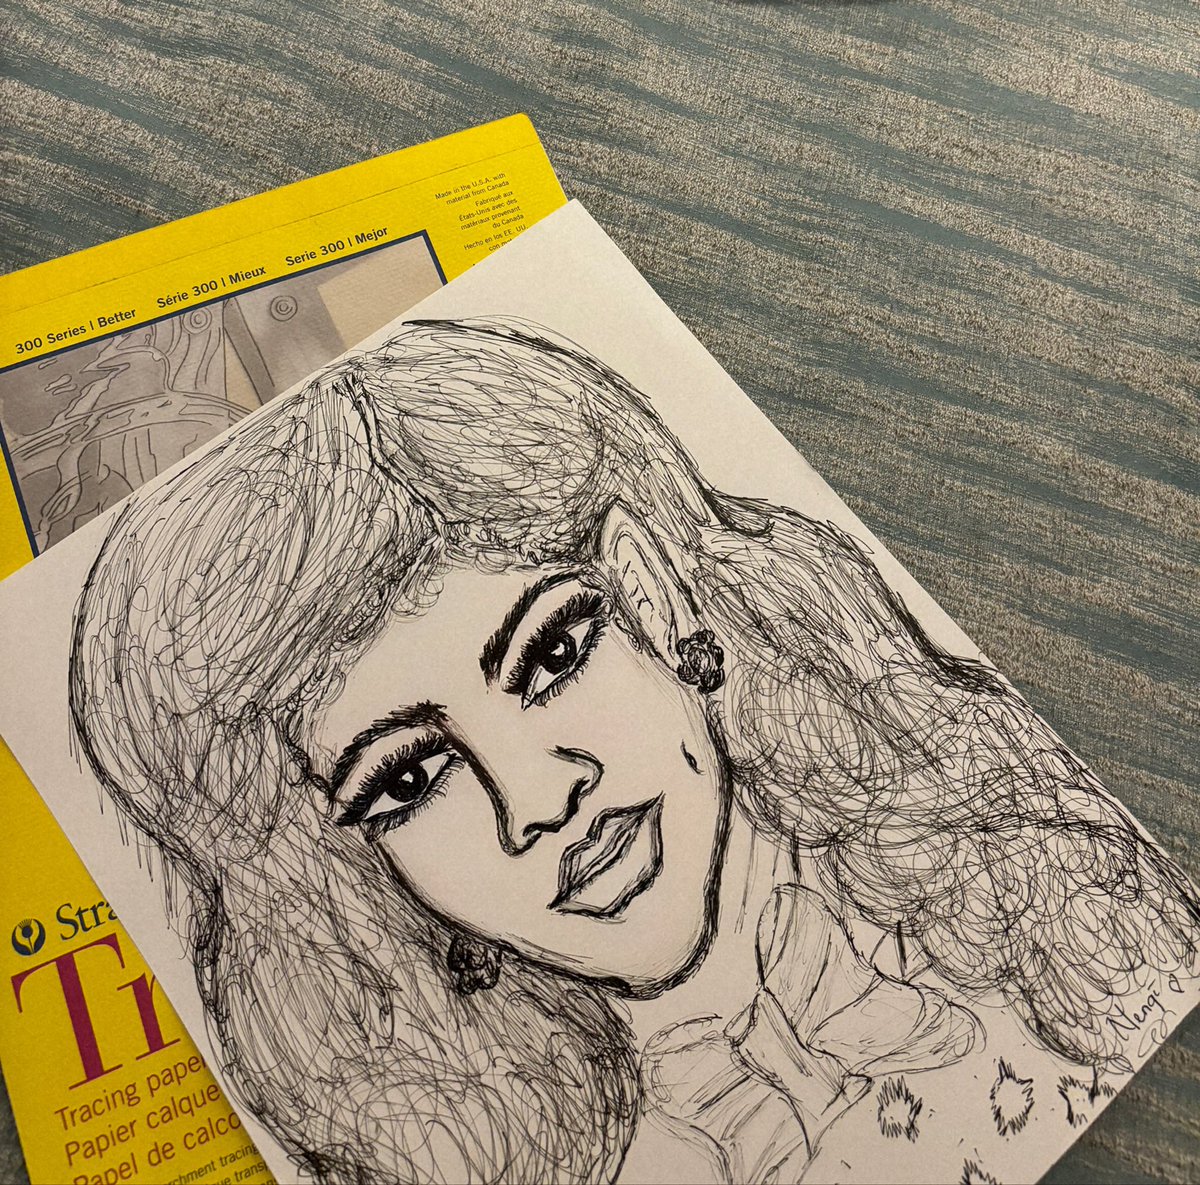 This beautiful sketch my bestie did of me in 10 mins 🥰 loveeet.. how do y’all think she did?